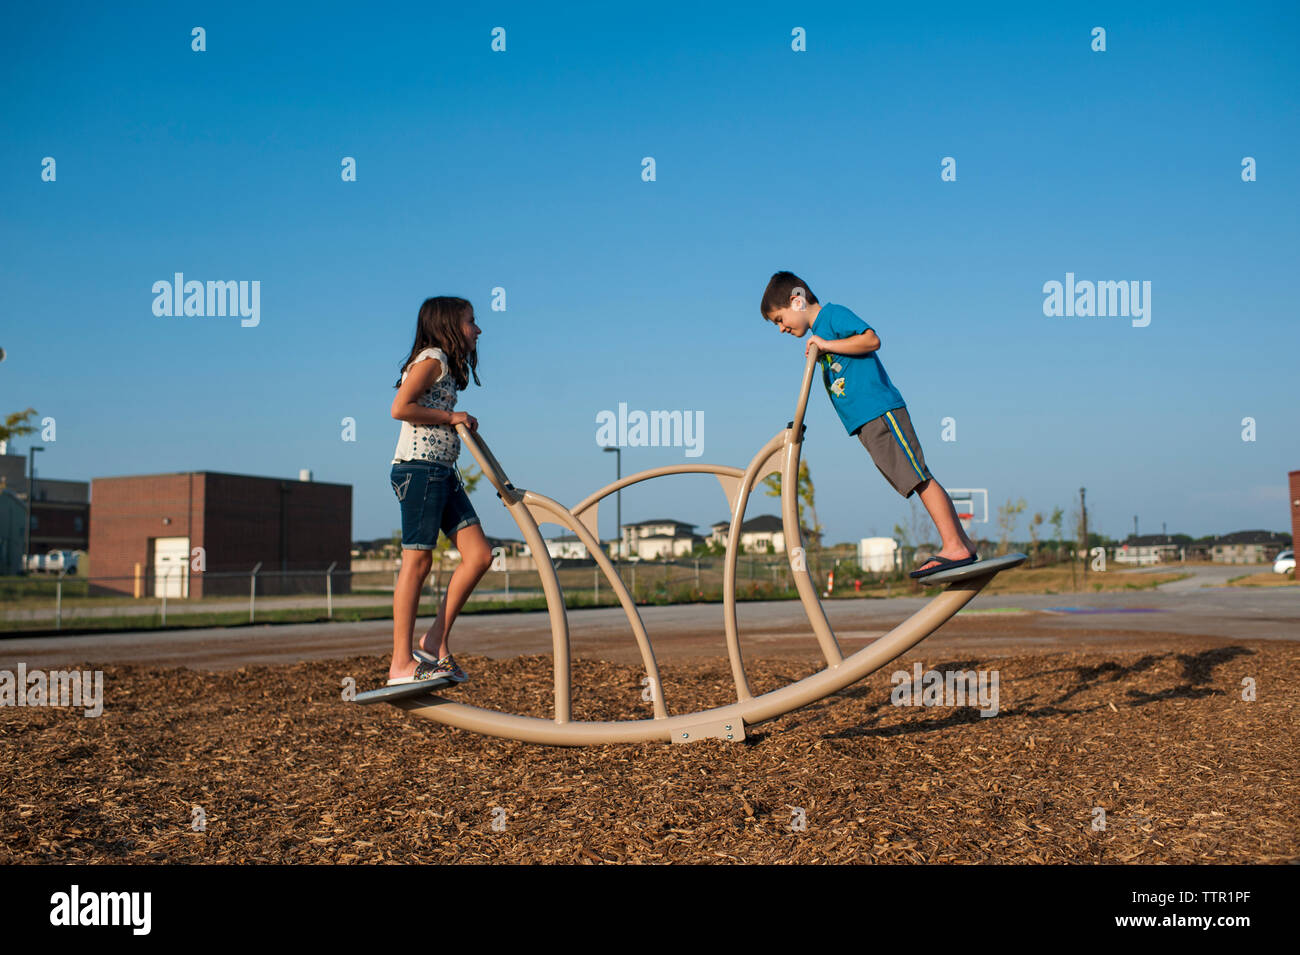 Side view of siblings playing on outdoor play equipment against clear blue sky at playground Stock Photo